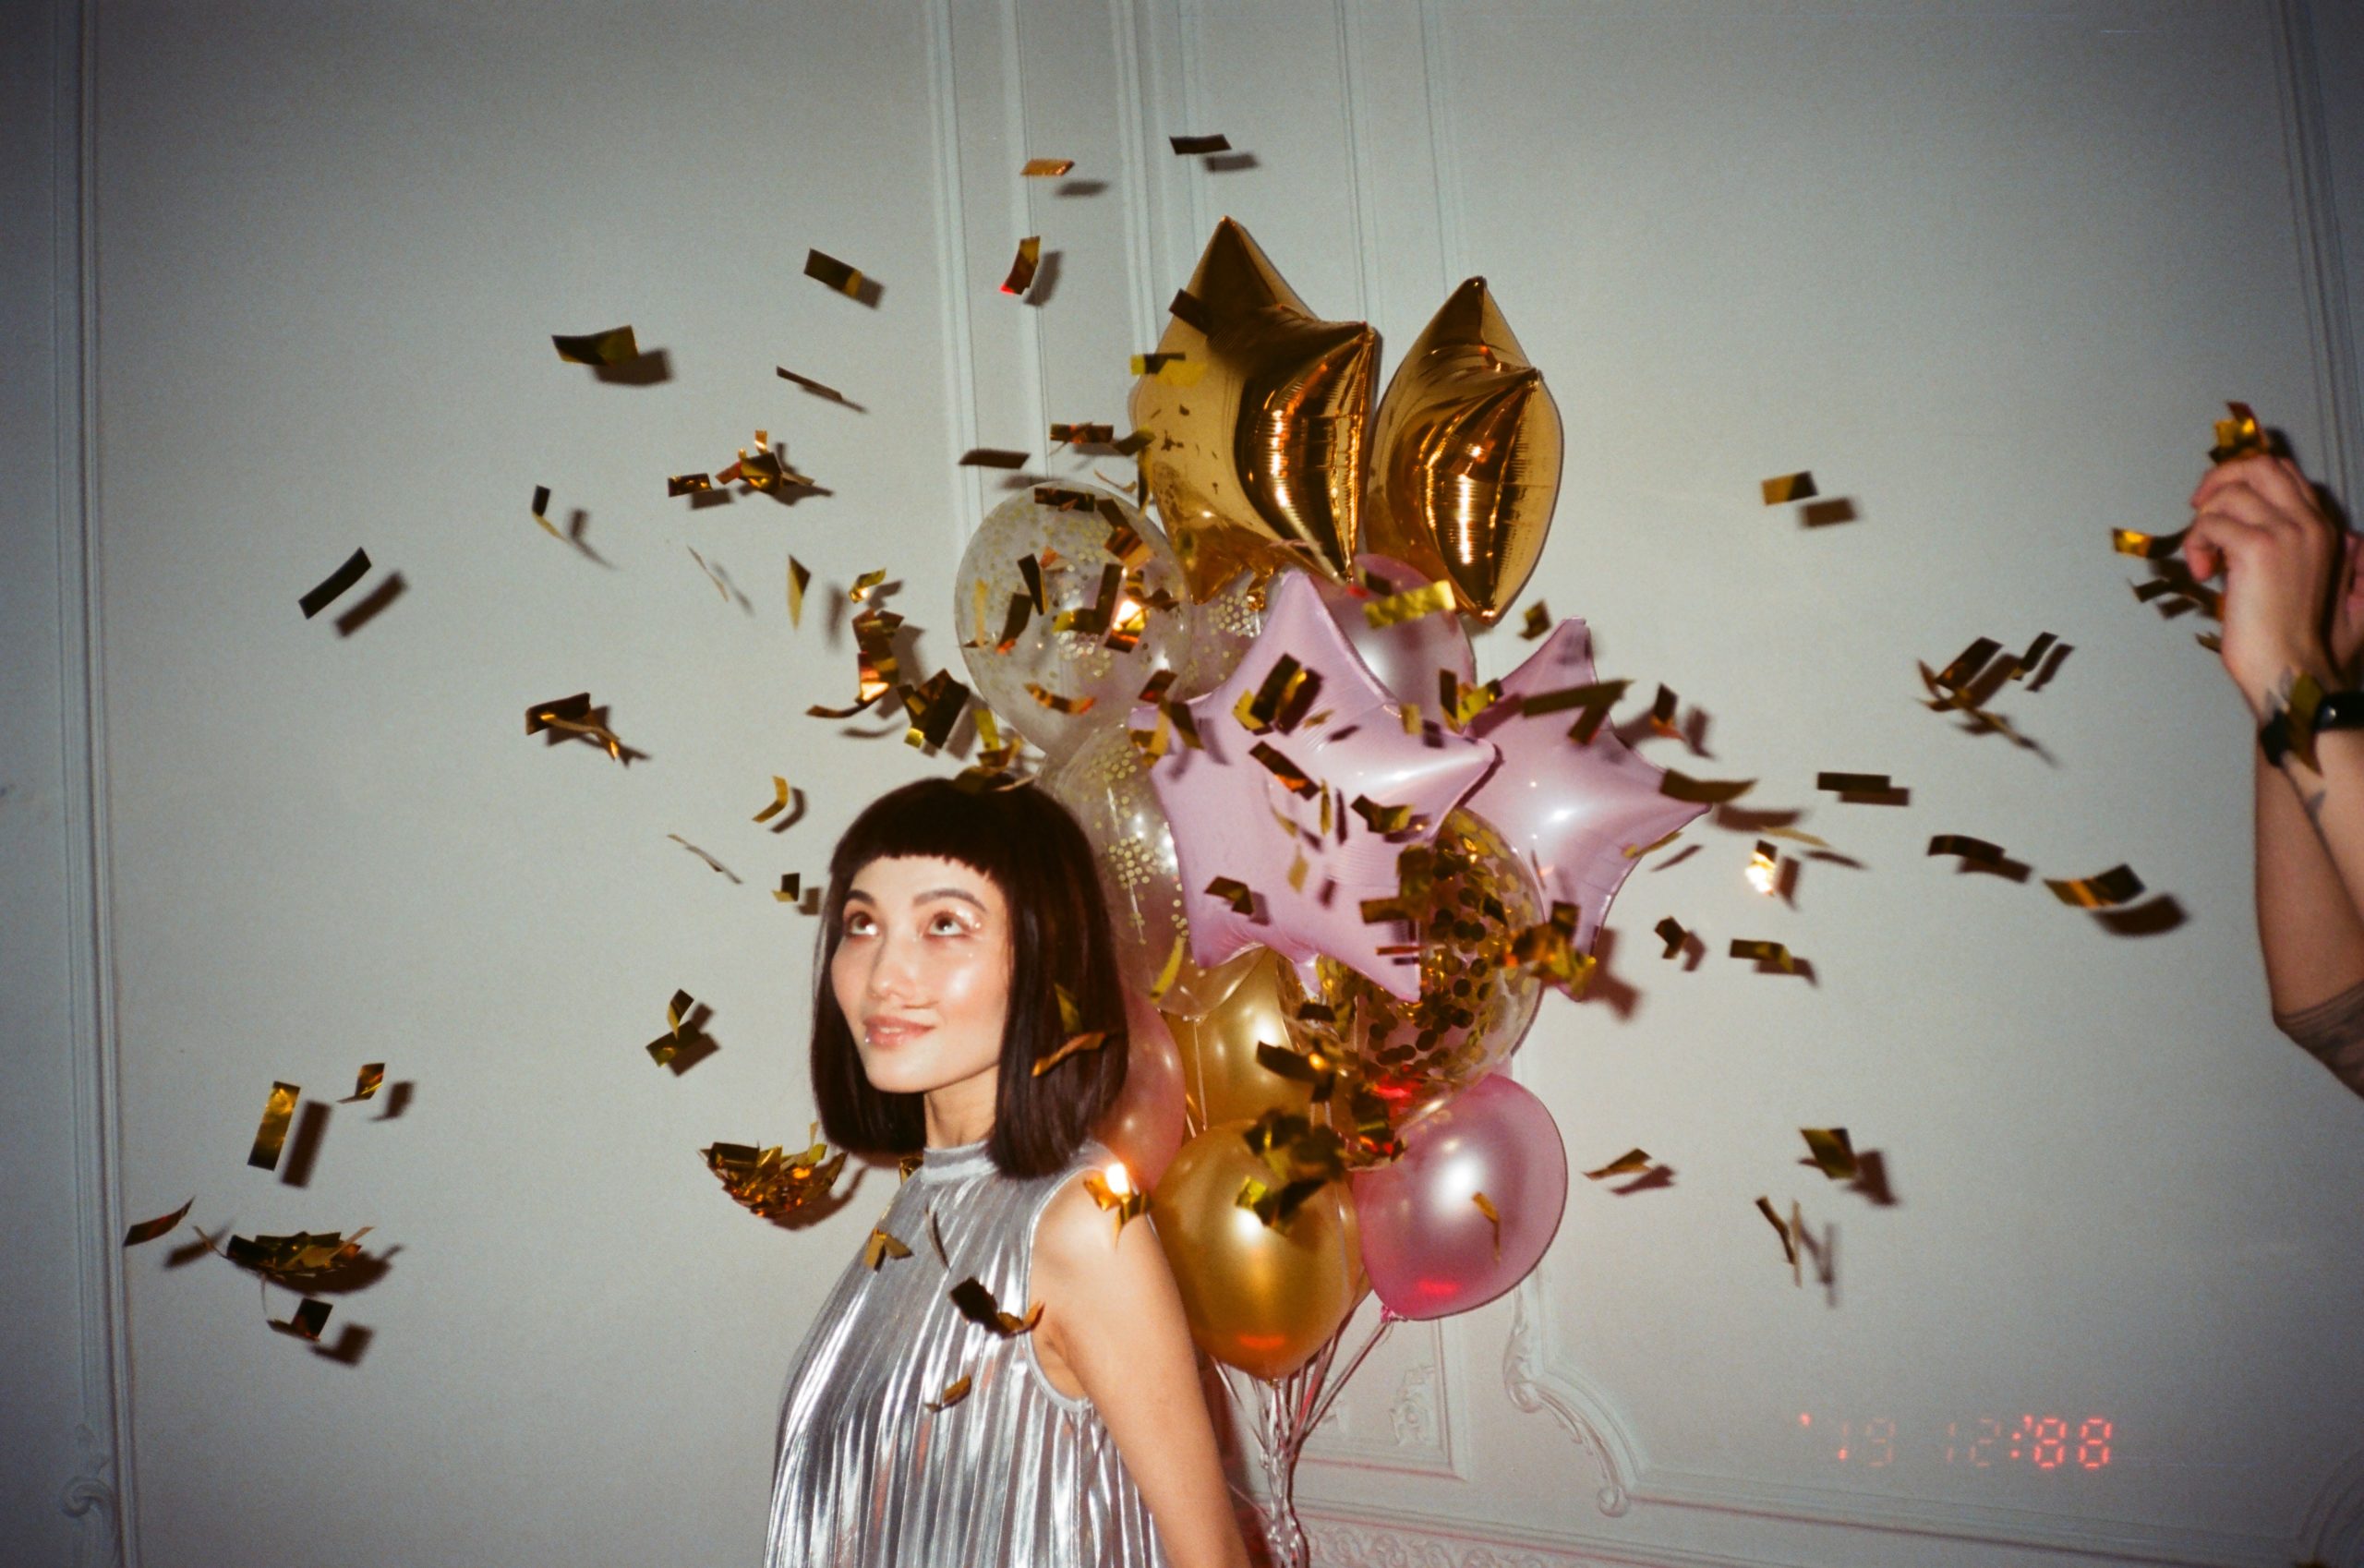 a woman posing in front of balloons and looking at the falling confettis